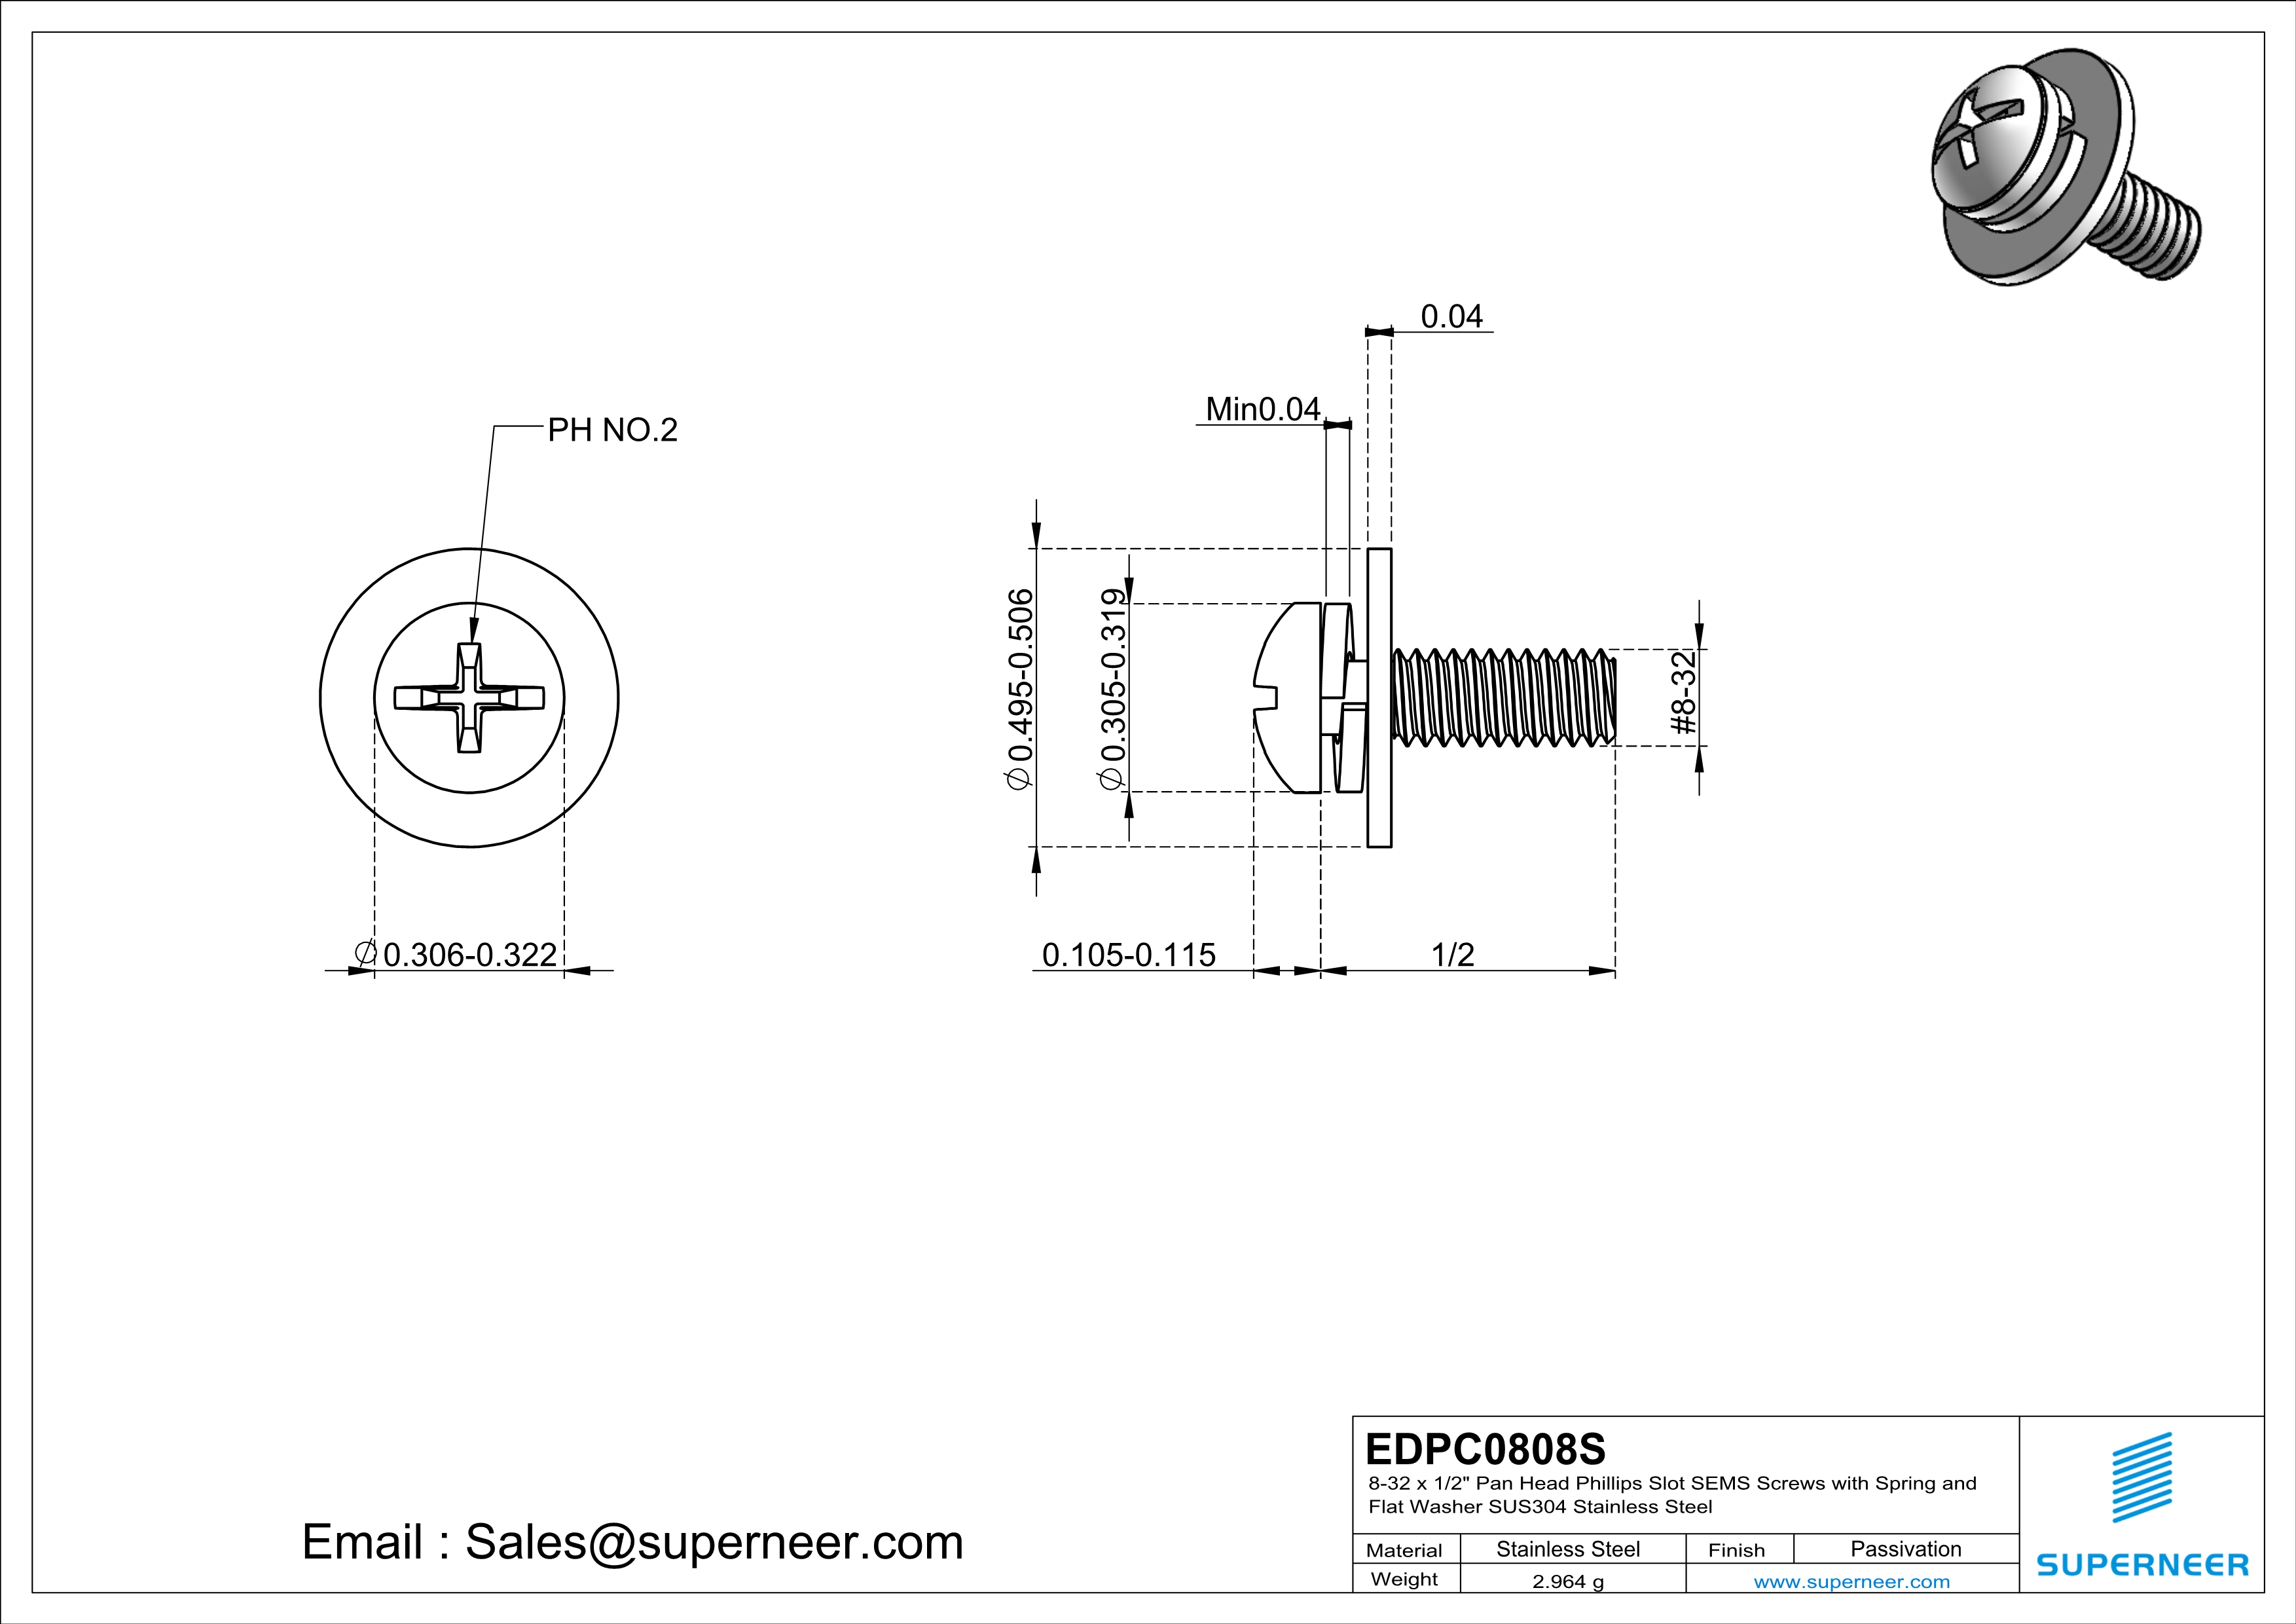 8-32 x 1/2" Pan Head Phillips Slot SEMS Screws with Spring and Flat Washer SUS304 Stainless Steel Inox